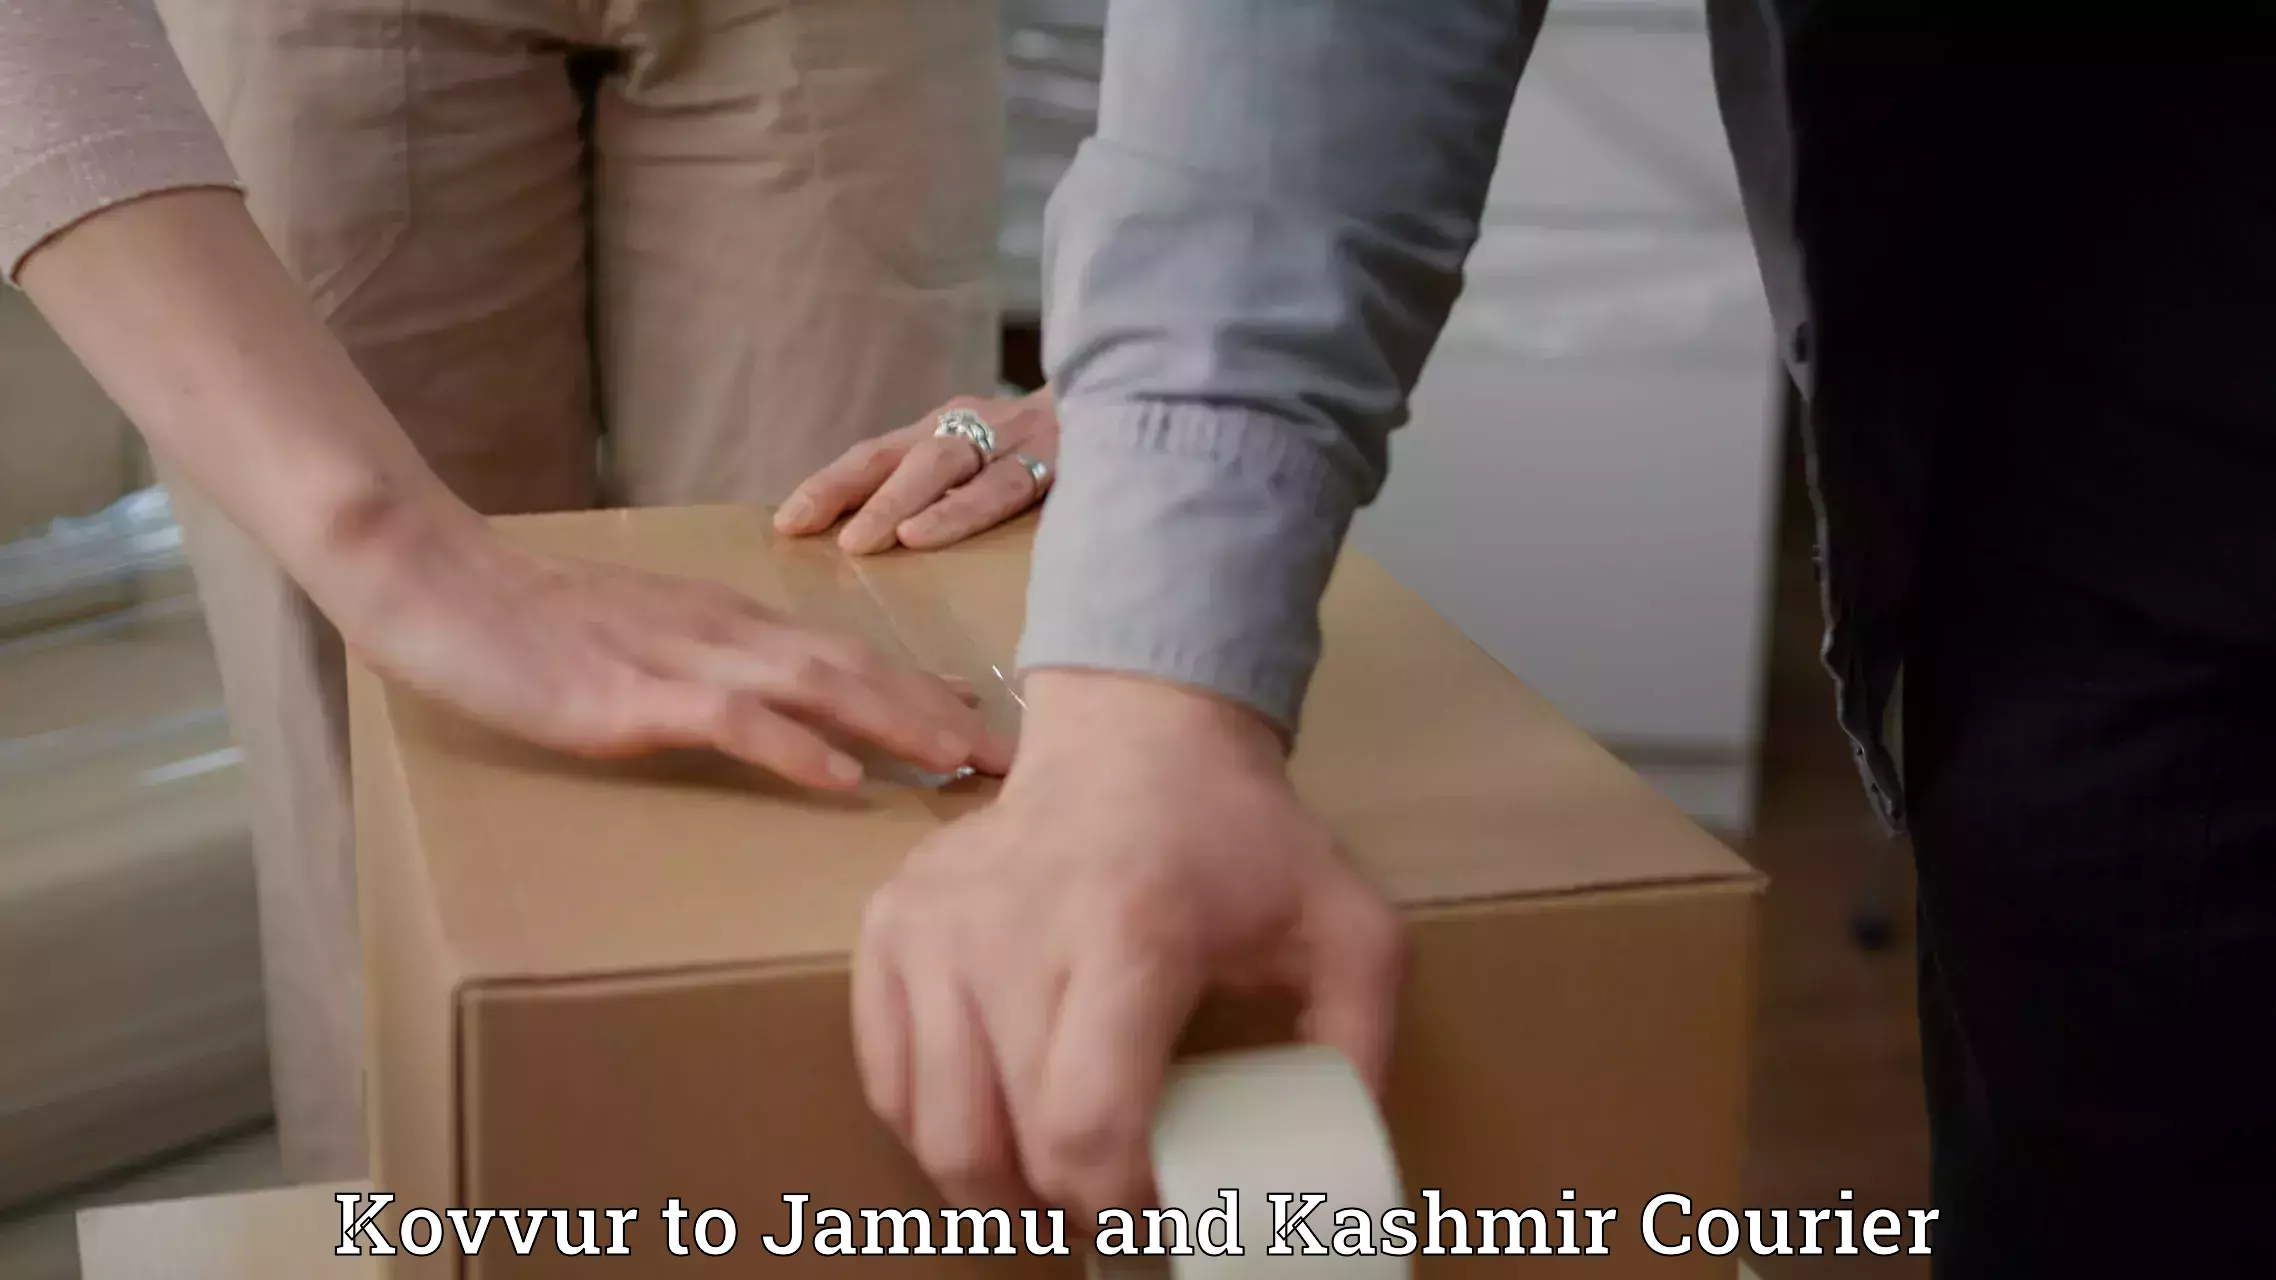 Rapid shipping services Kovvur to Anantnag